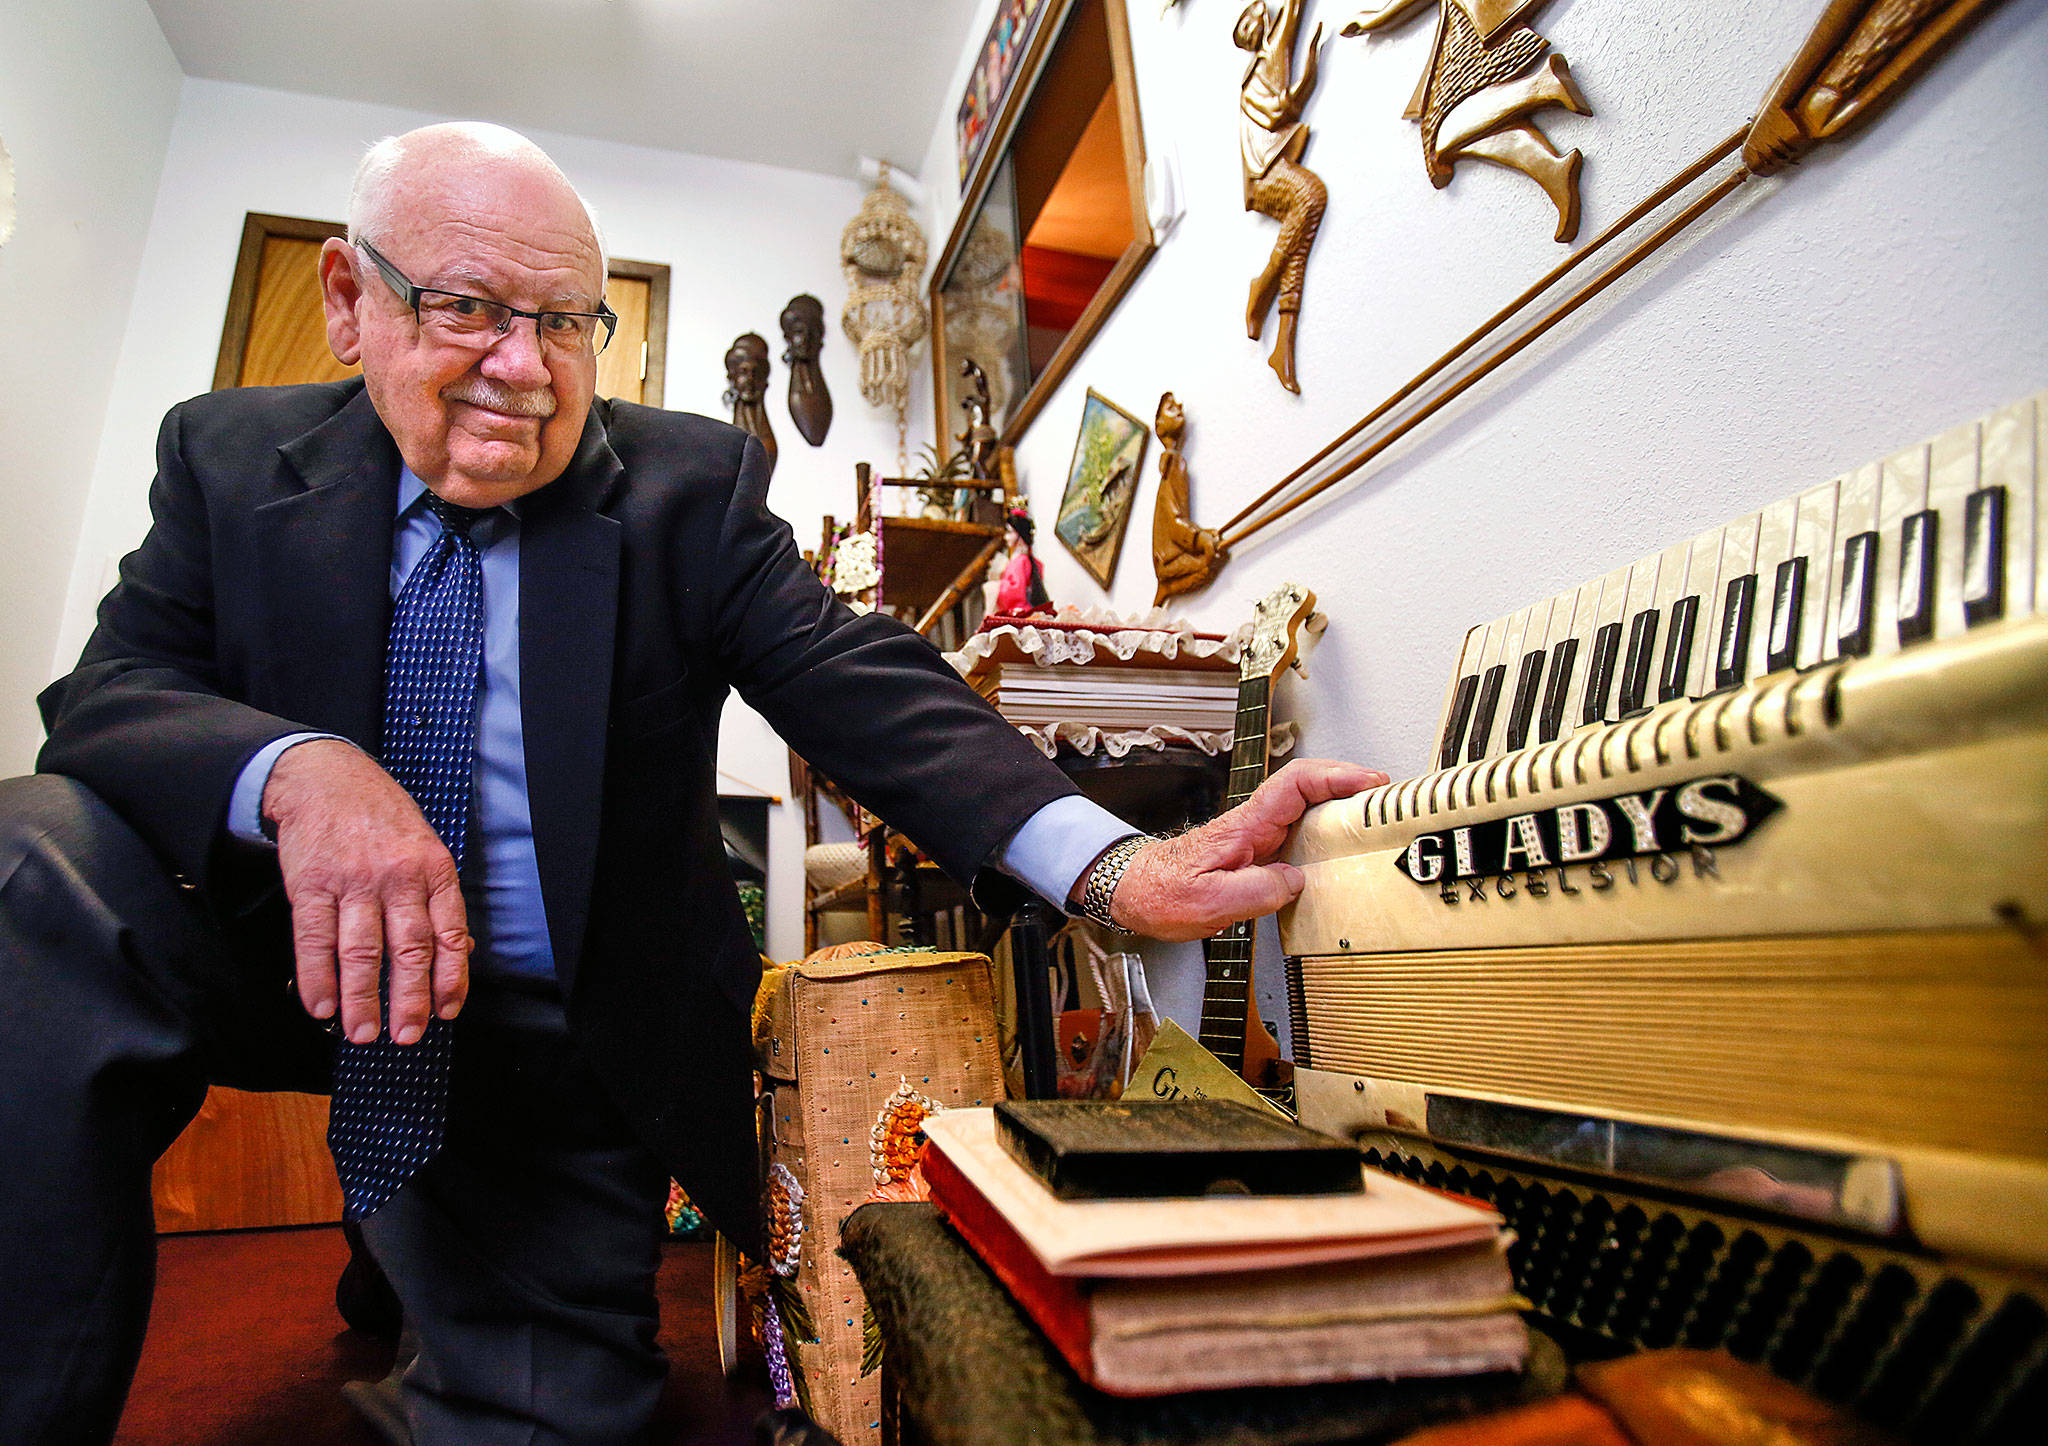 At the Gospel Light Church in Everett, founding member and longtime pastor, Newton Waldrop offers a peek inside a small room filled with memories covering several generations of his family who served here. His mother, Gladys, played the accordion at right as well as the banjo. (Dan Bates / The Herald)